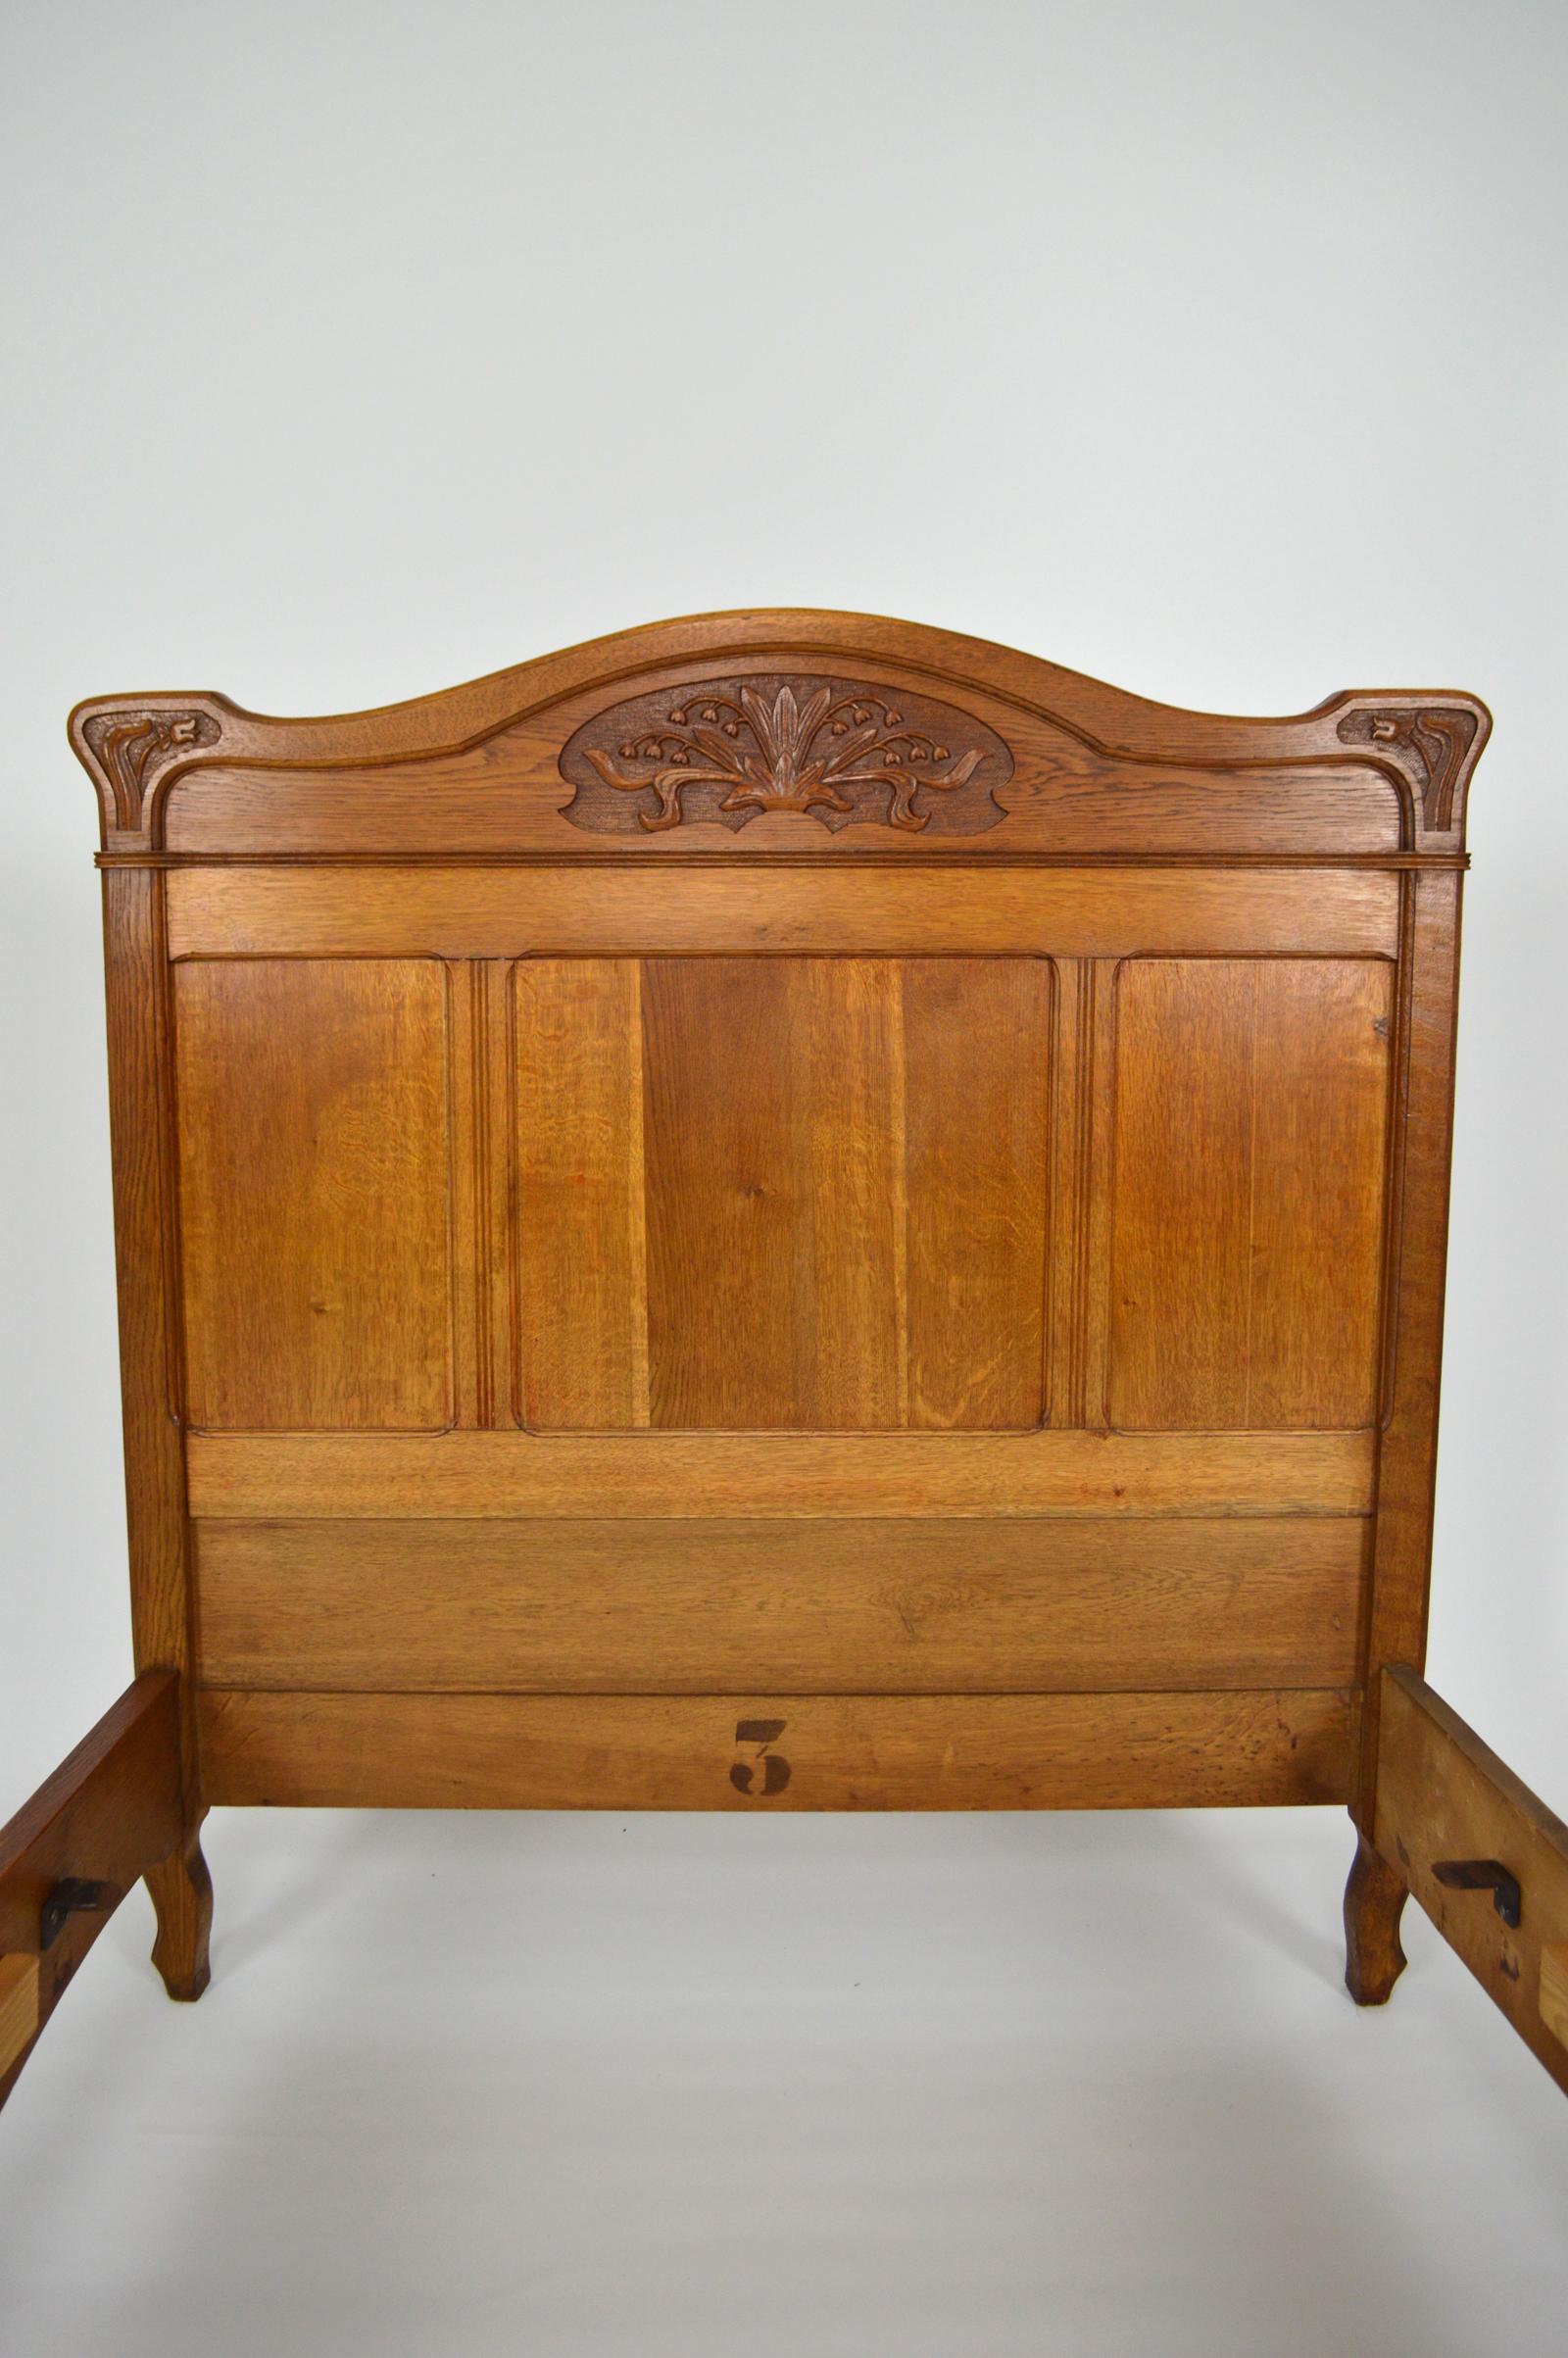 French Art Nouveau Twin Beds Bedroom Set of 3 in Solid Carved Oak, circa 1910 For Sale 9